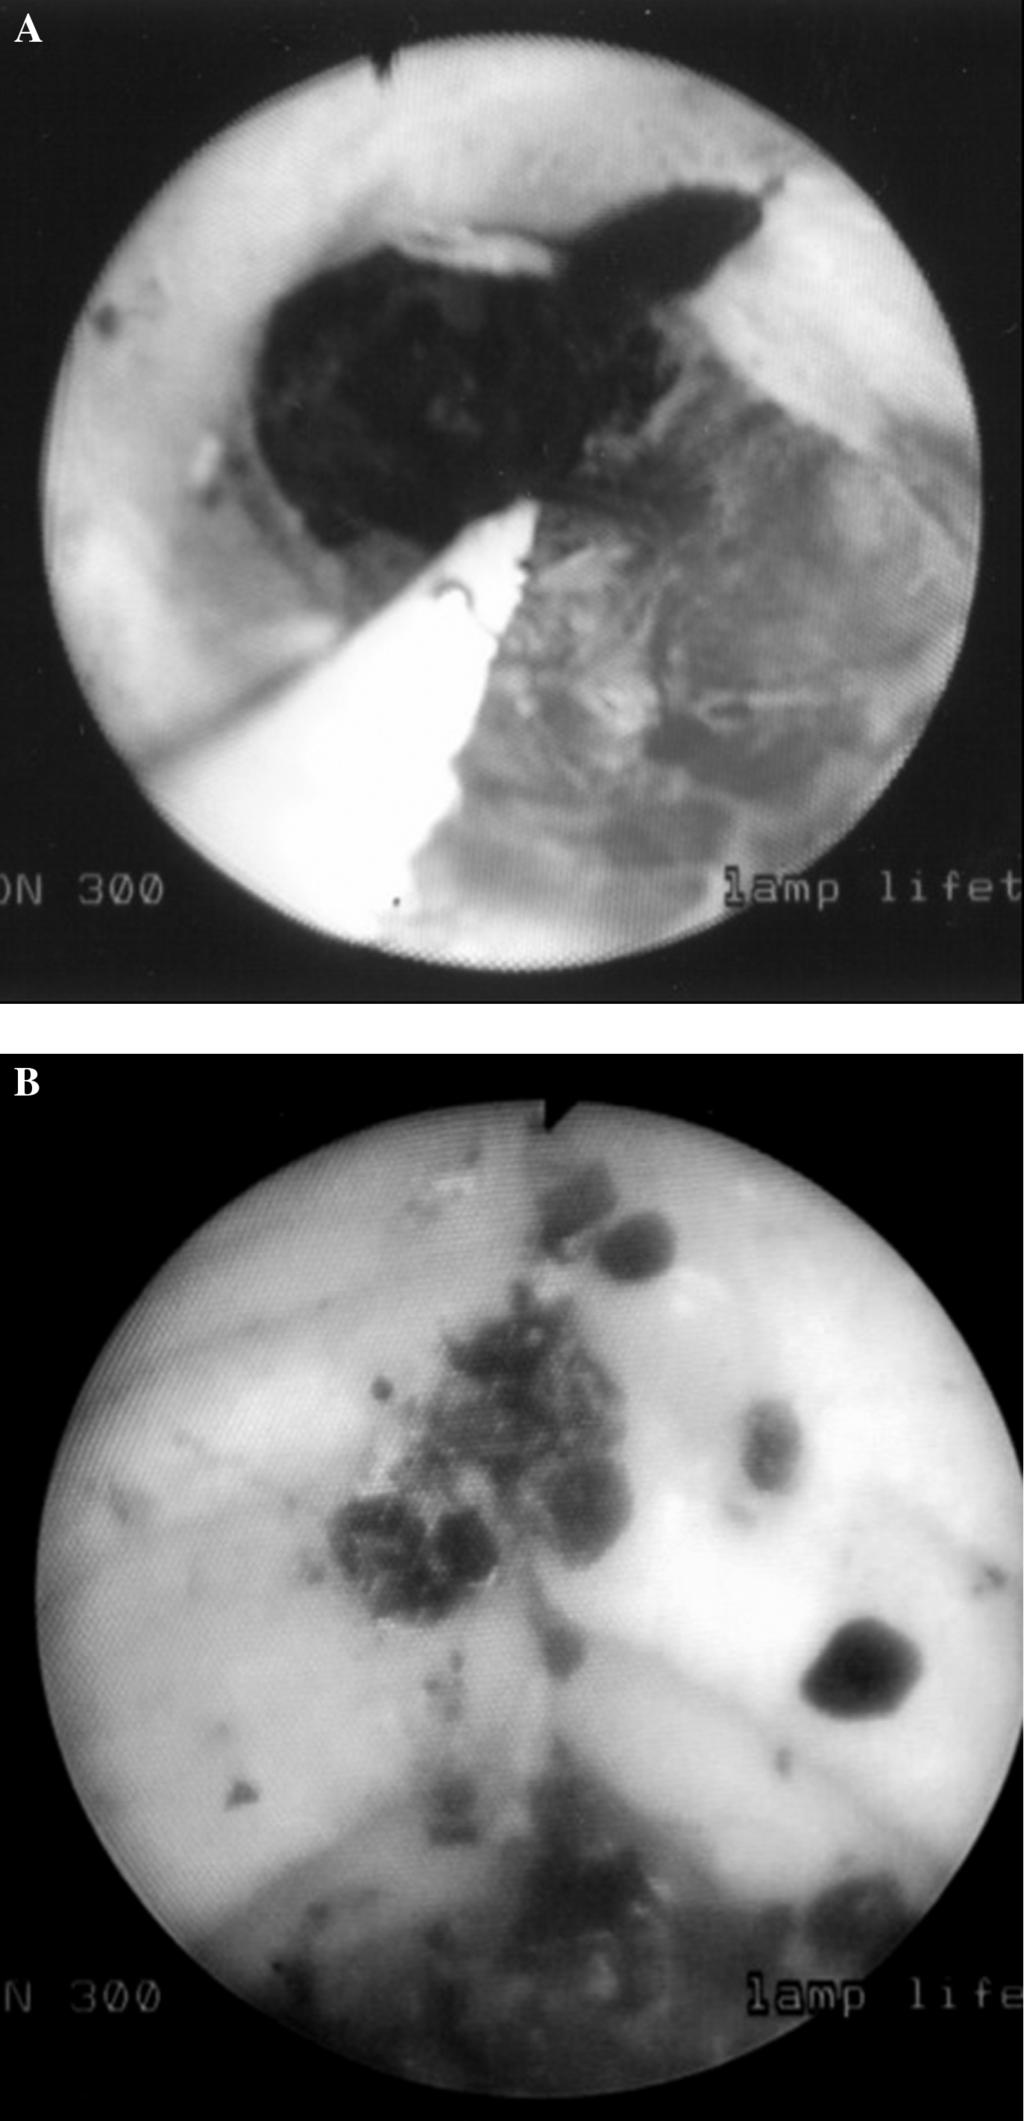 Percutaneous Endoscopic Holmium Laser Lithotripsy for Management of Complicated Biliary Calculi, Healy K et al antegrade passage of a Fogarty balloon over a guide wire into the duodenum to expel any